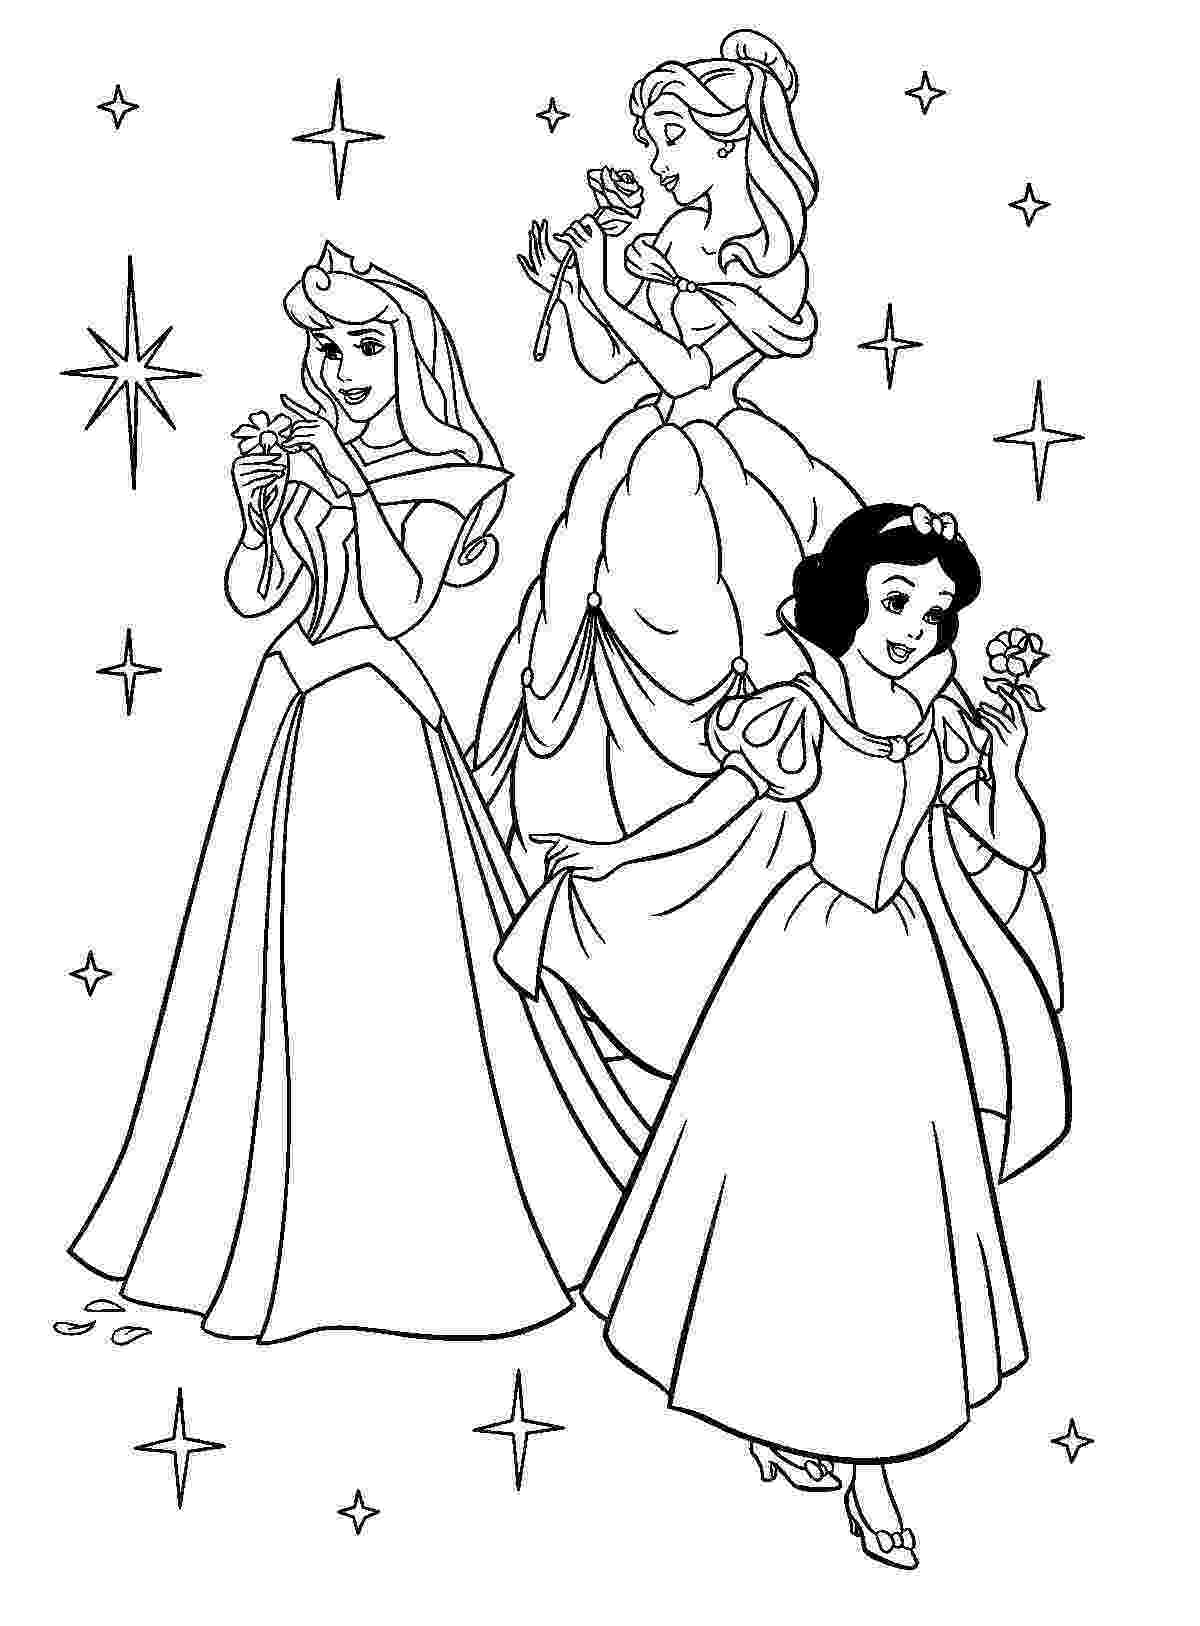 free coloring pages of all the disney princesses disney princess coloring pages minister coloring pages disney of coloring free the princesses all 